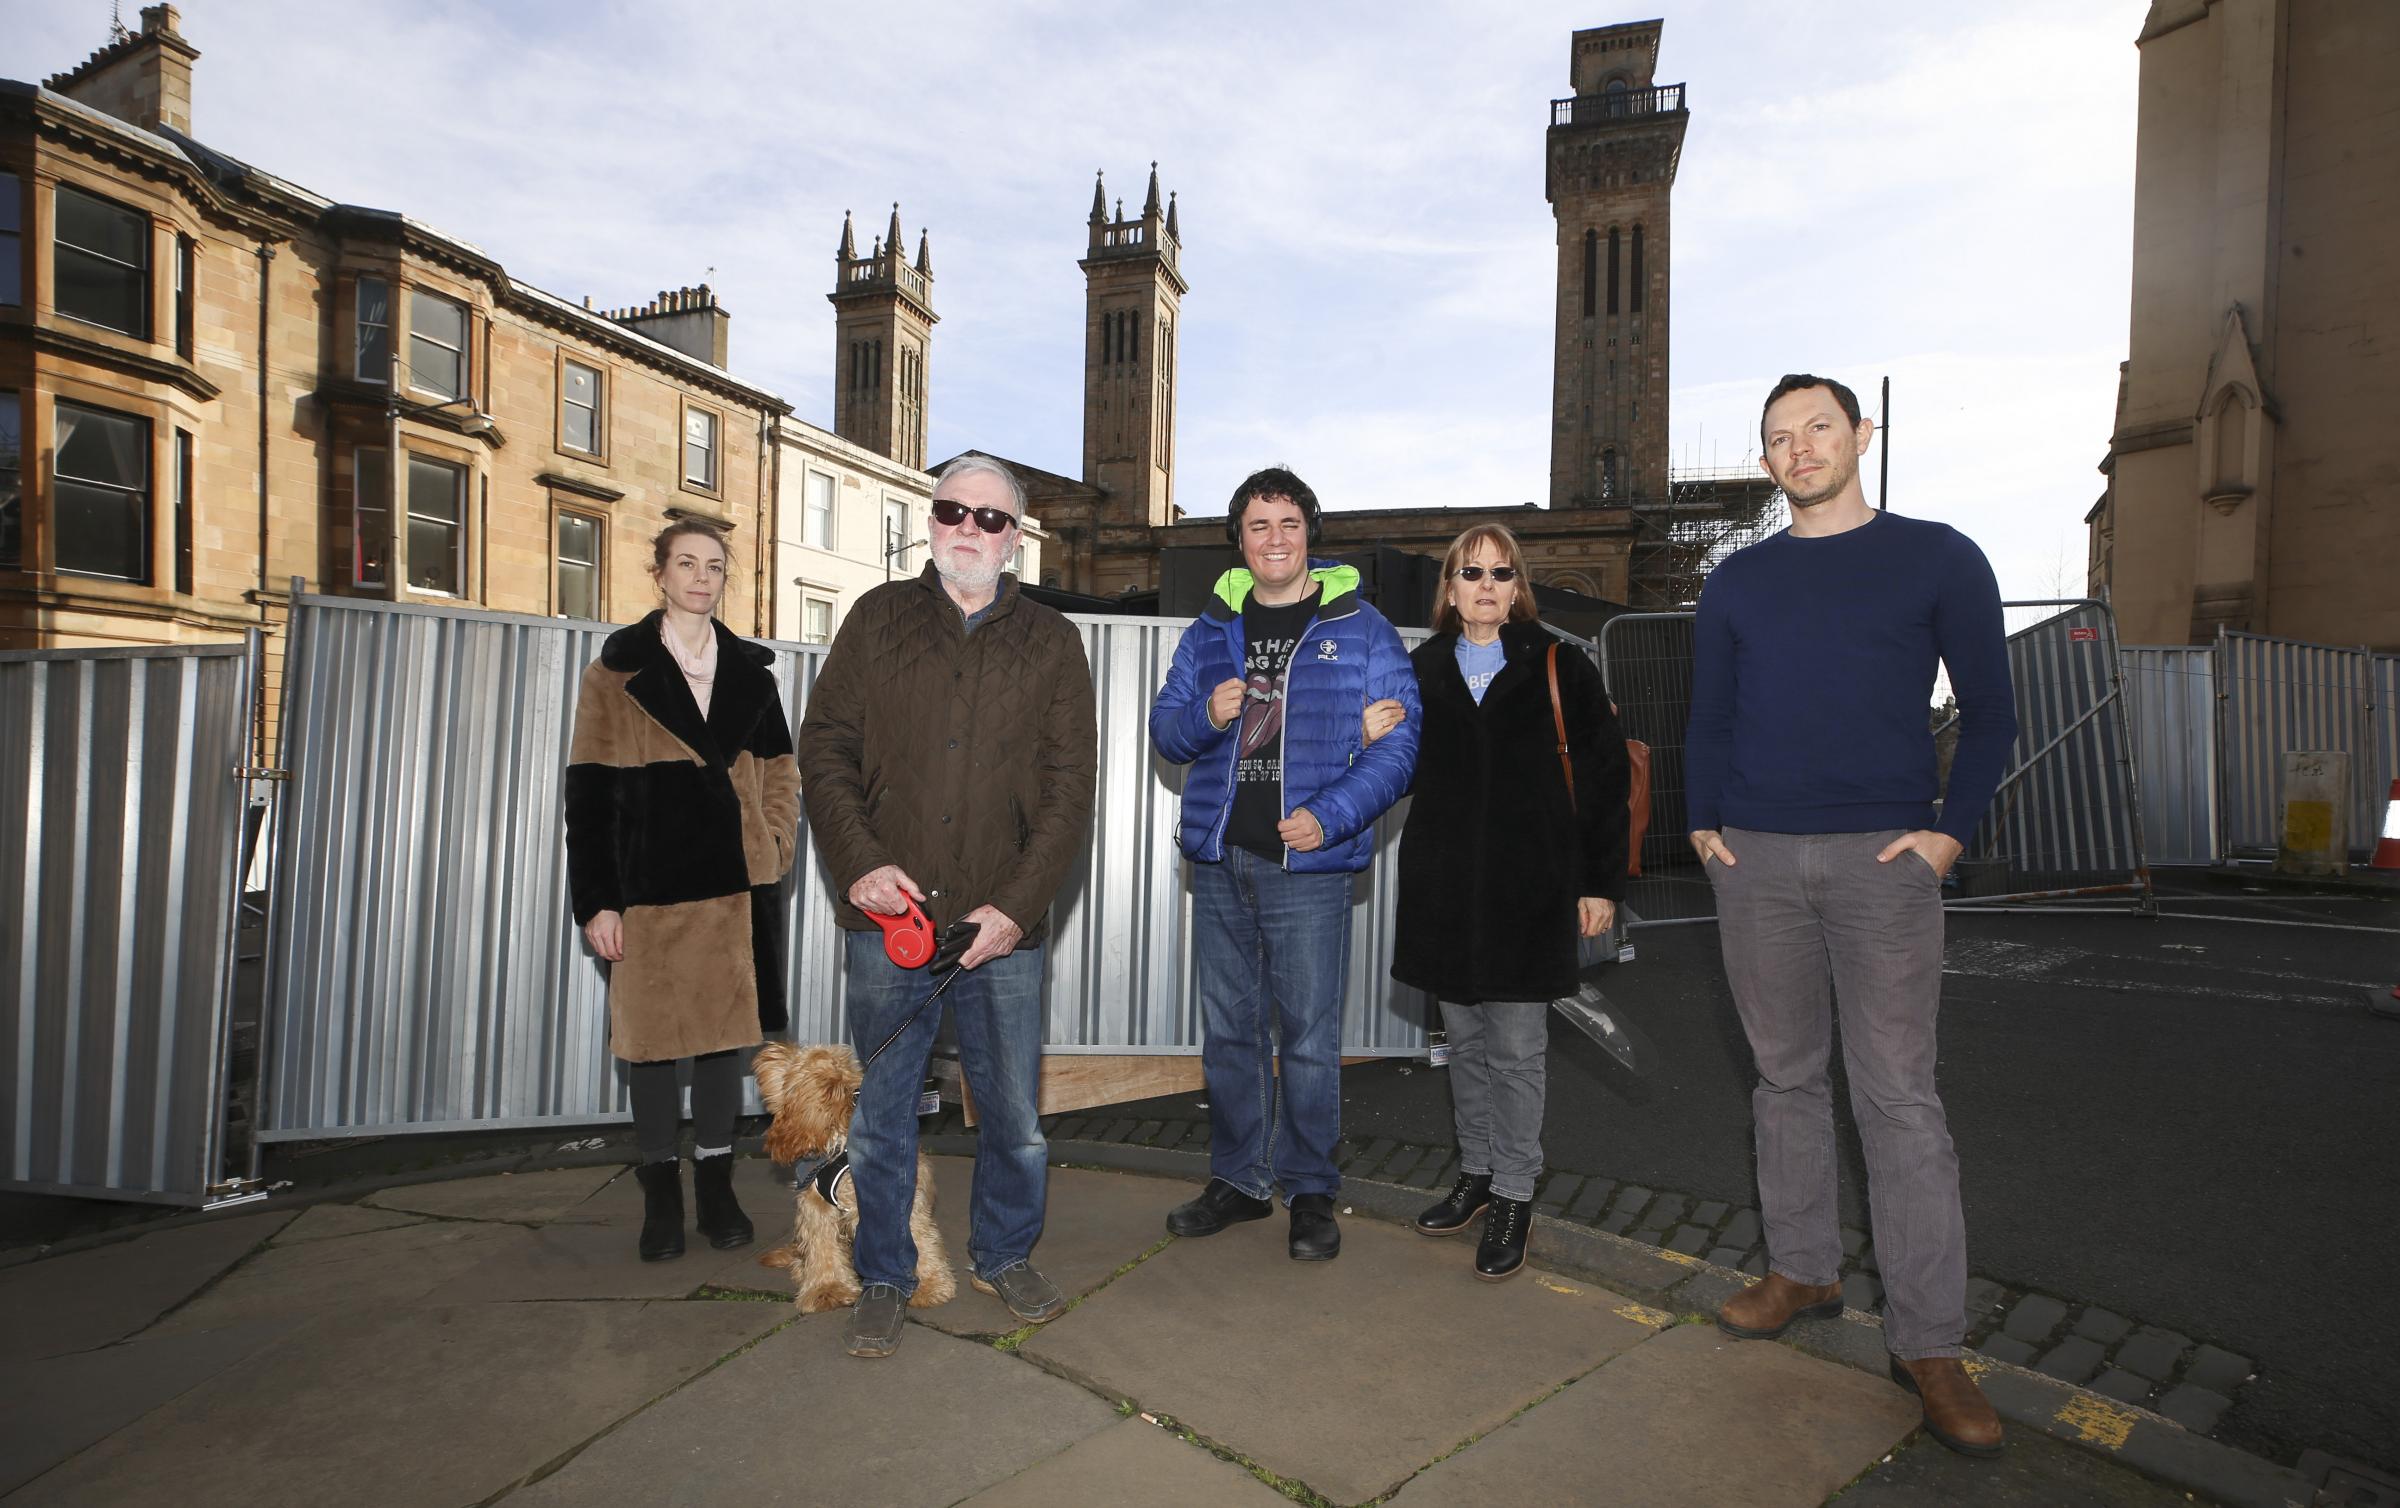 A ring of steel remains around Trinity Tower in Glasgows Park Circus which has displaced residents. From left, Francesca Barrow, Dr john Doyle, Rosemary McIlroy and son Jamie, Doron Finkelstein. Photo by Gordon Terris.